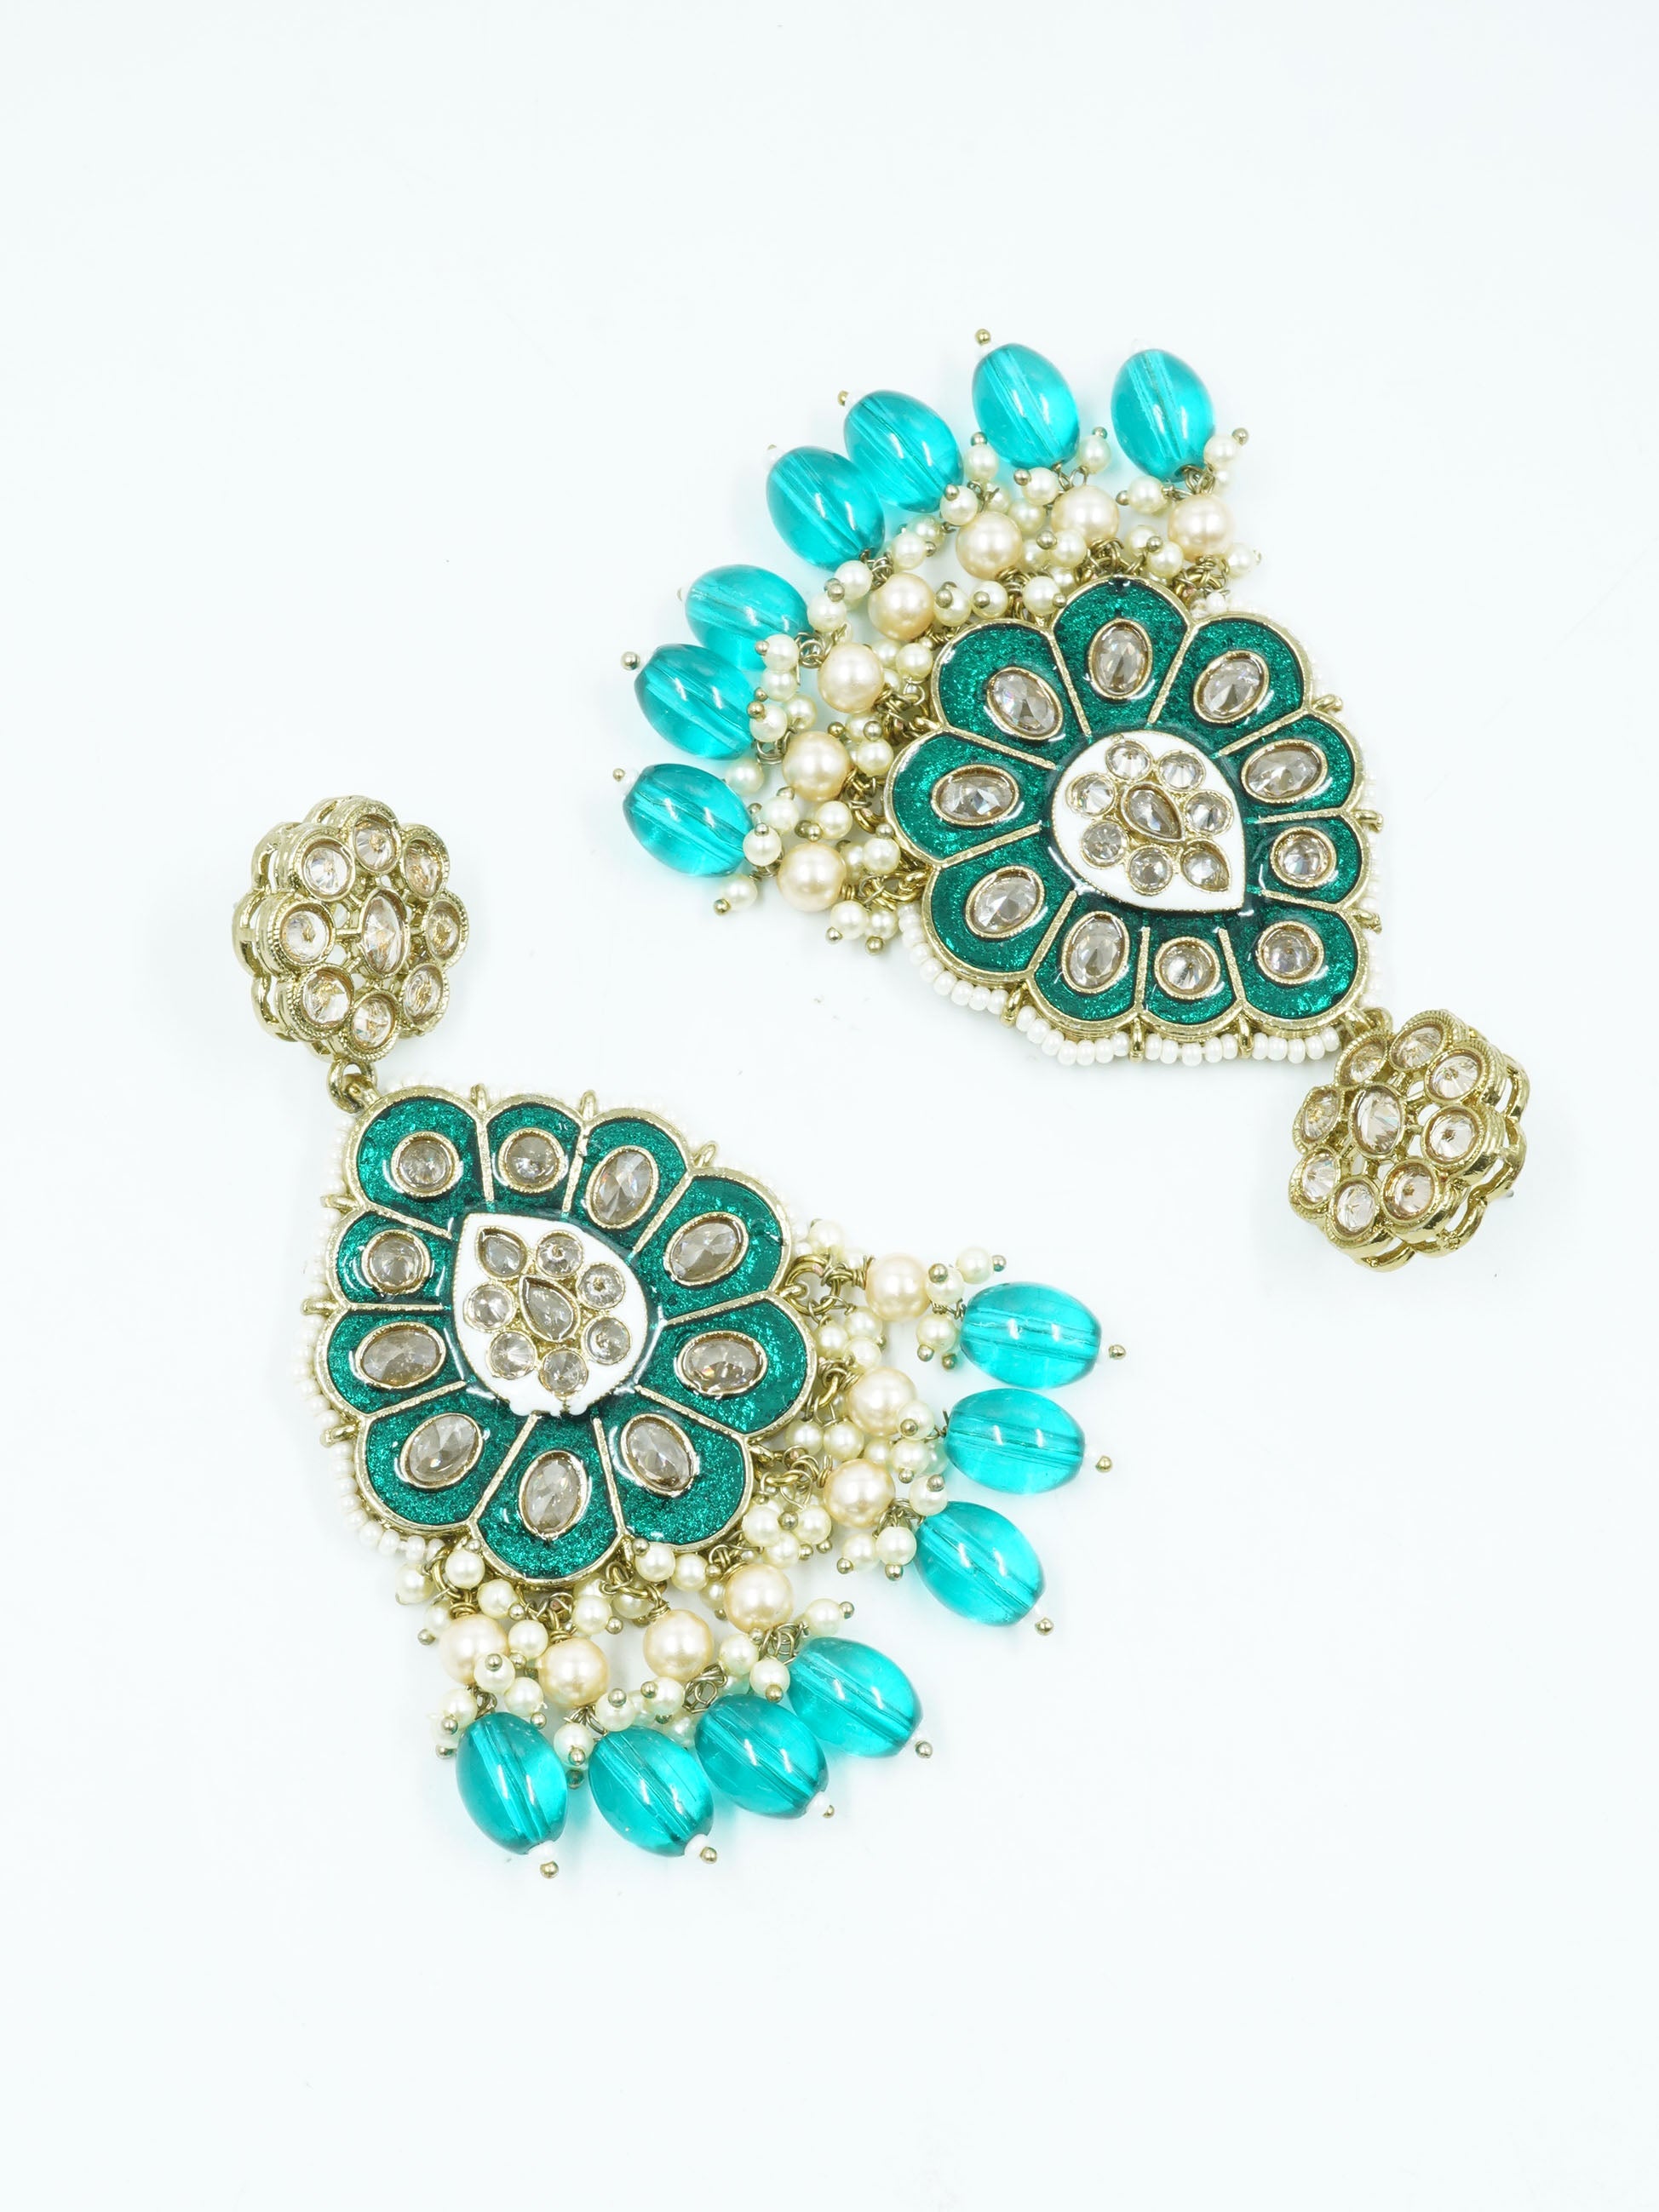 Faint gold finish Earring/jhumka/Dangler with Sea Green color Drops 11806N